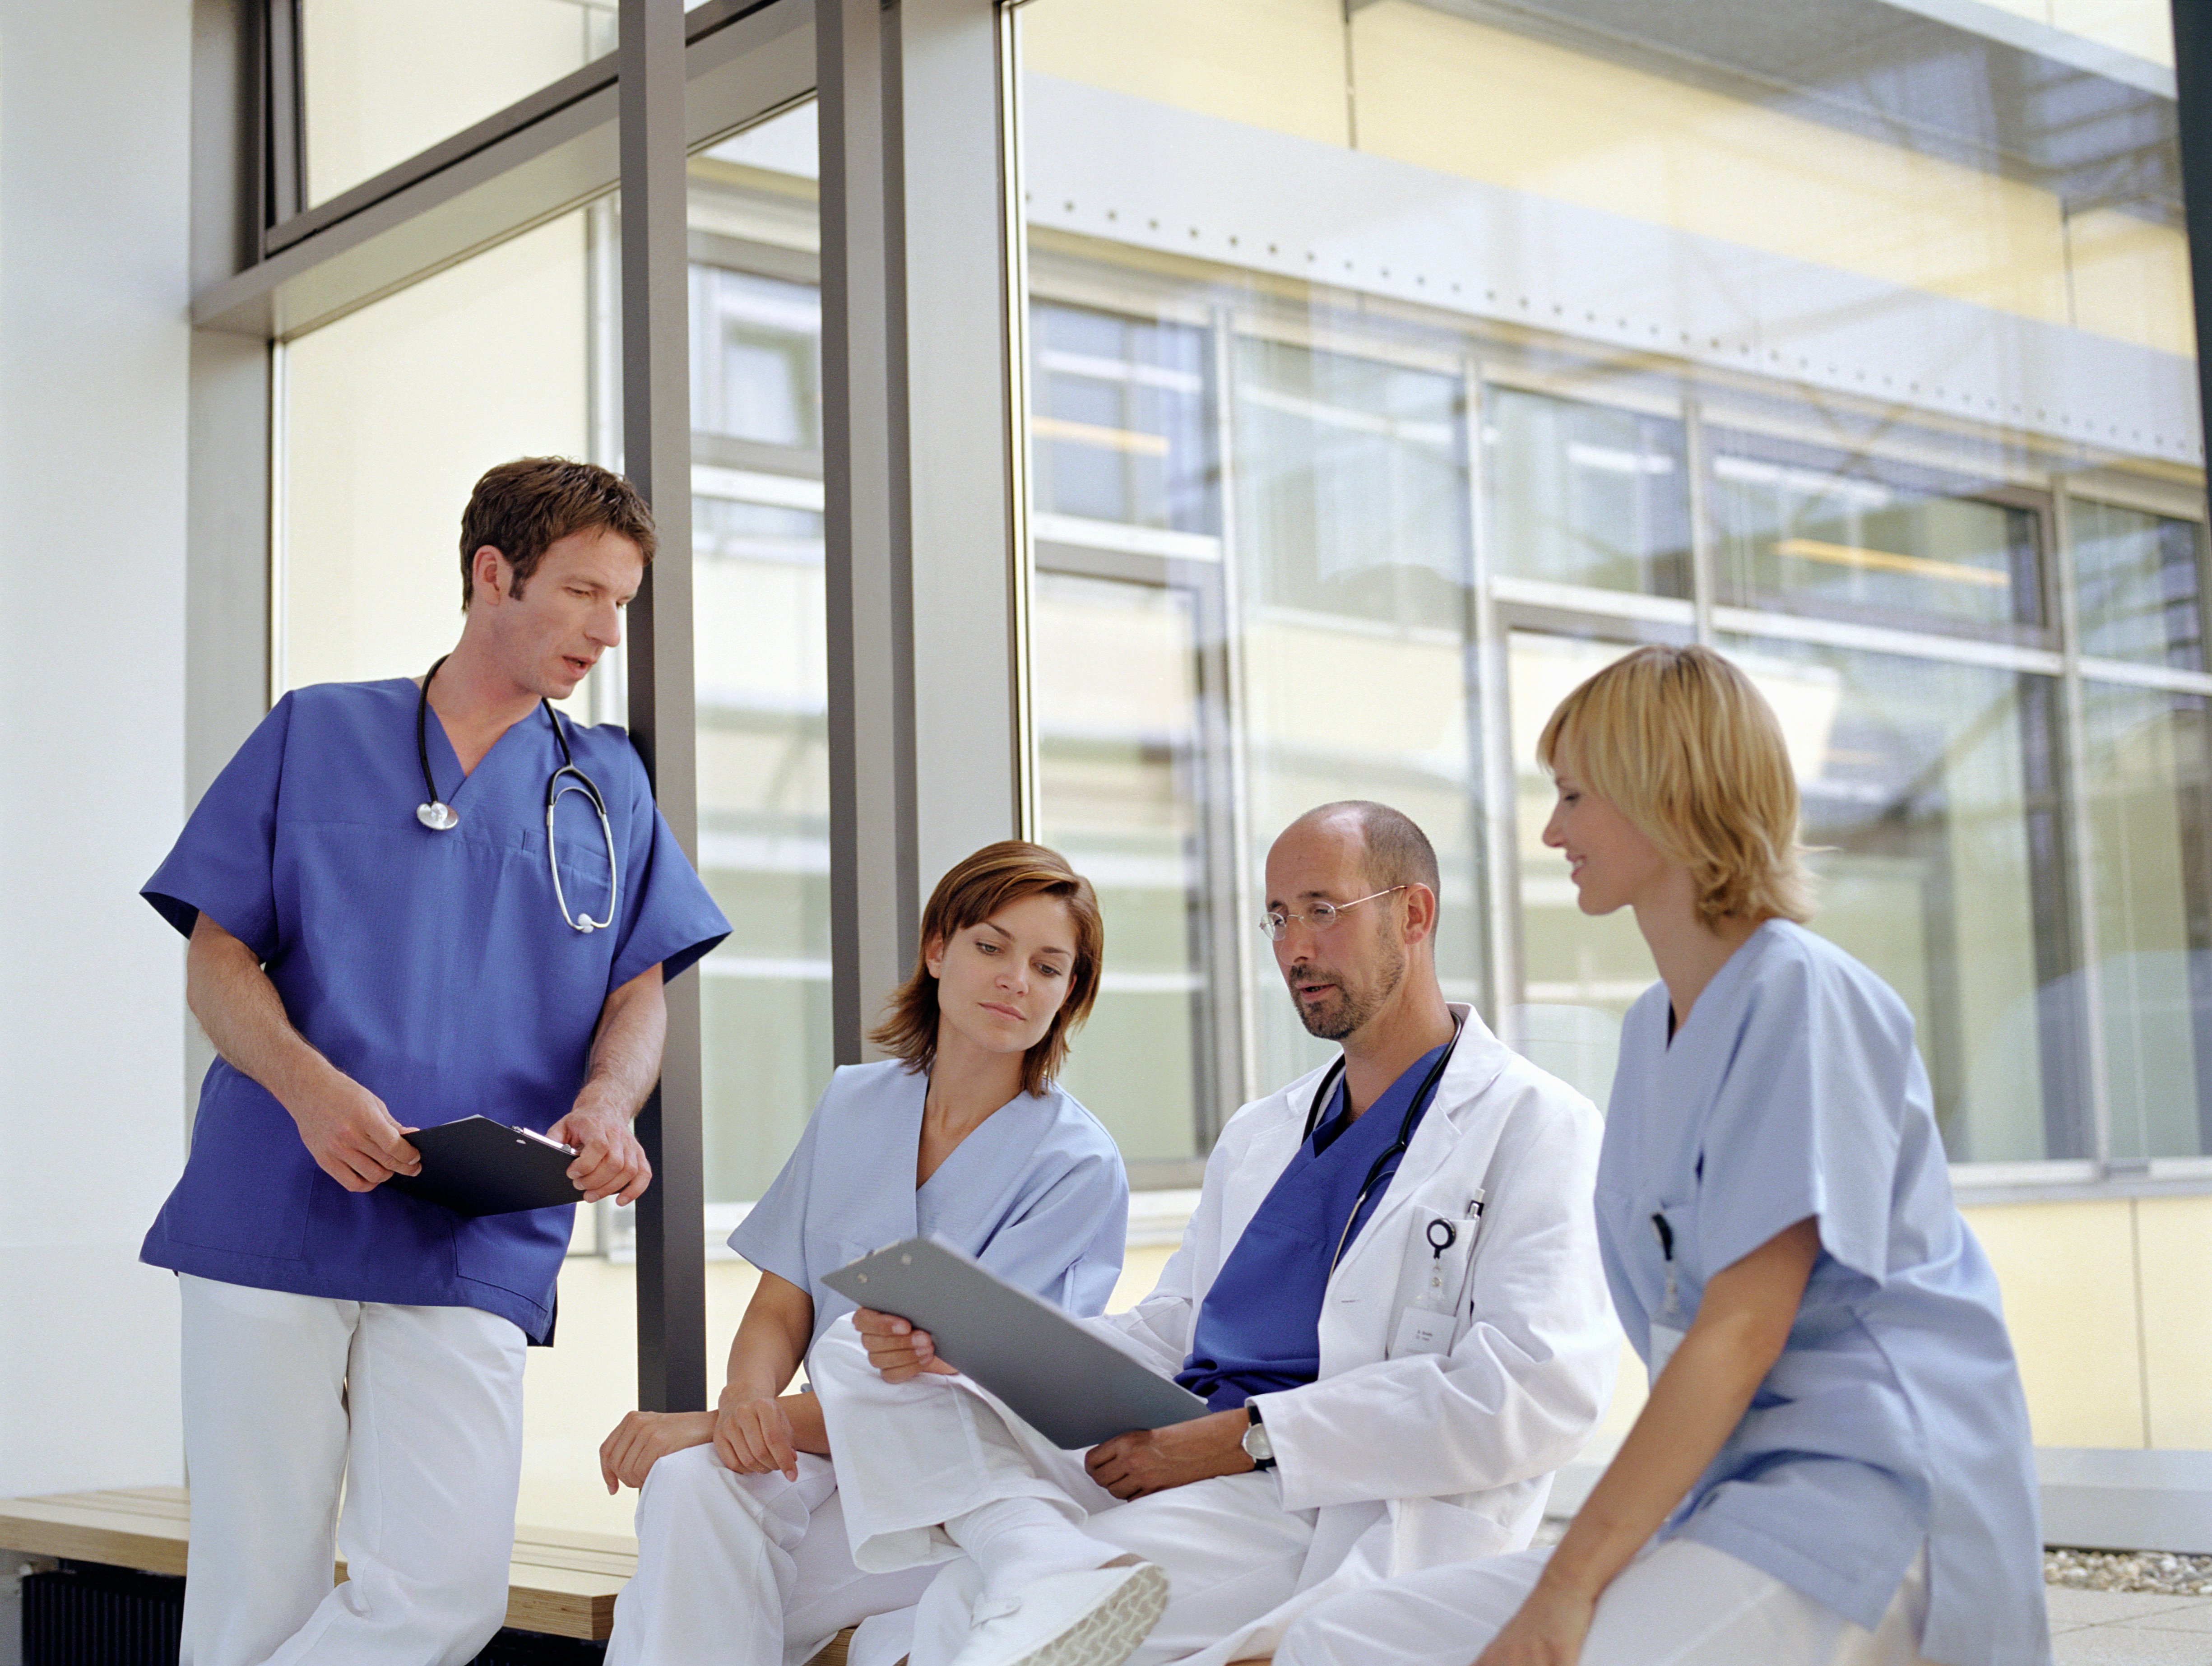 Healthcare workers gathering by a window in a hospital